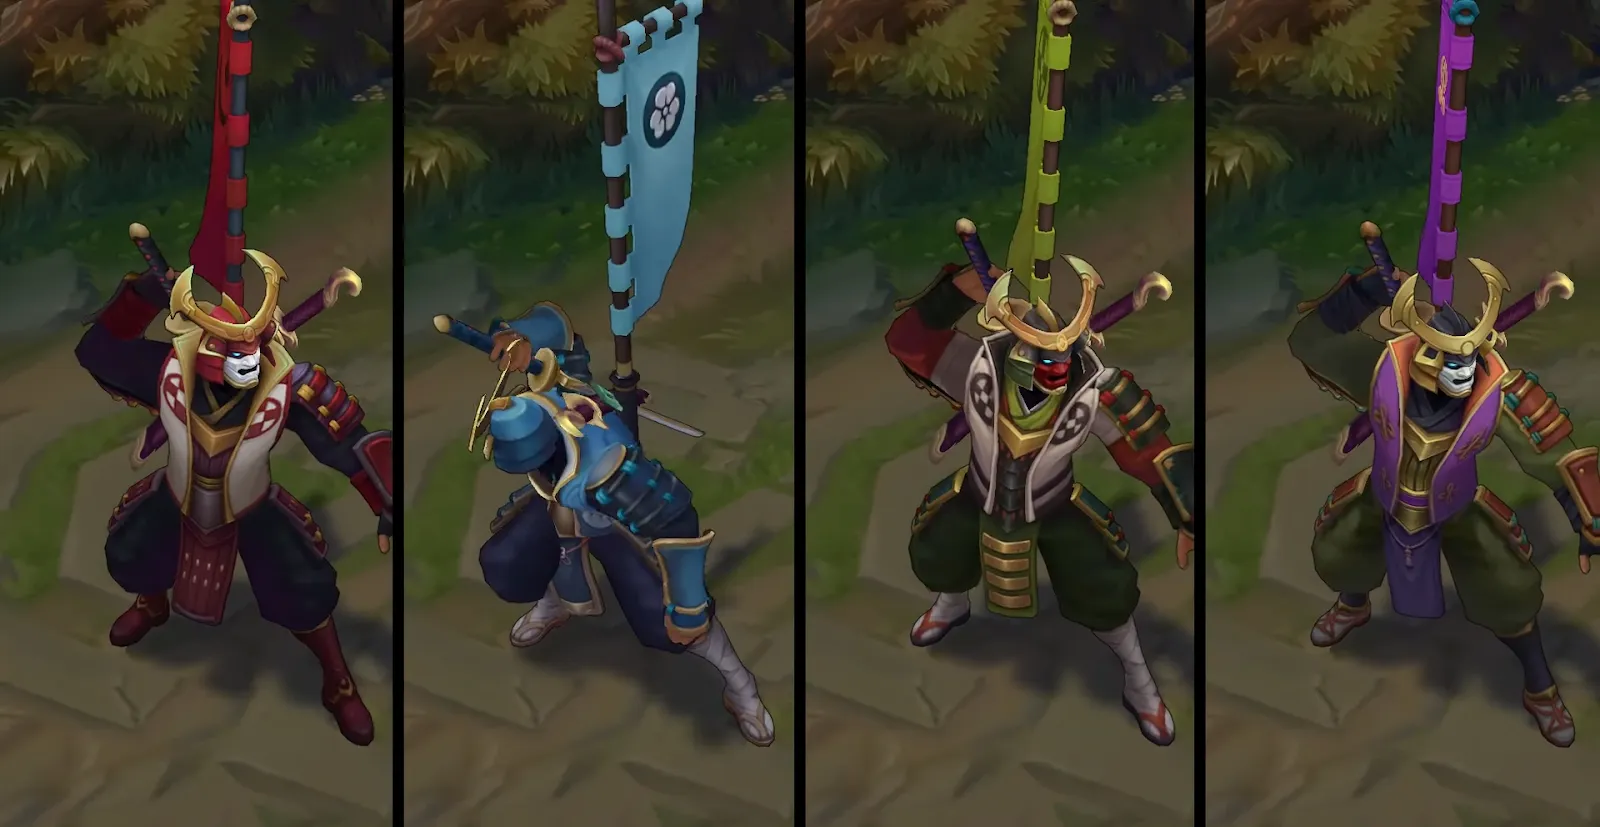 Different designs and colors for Warlord Shen.